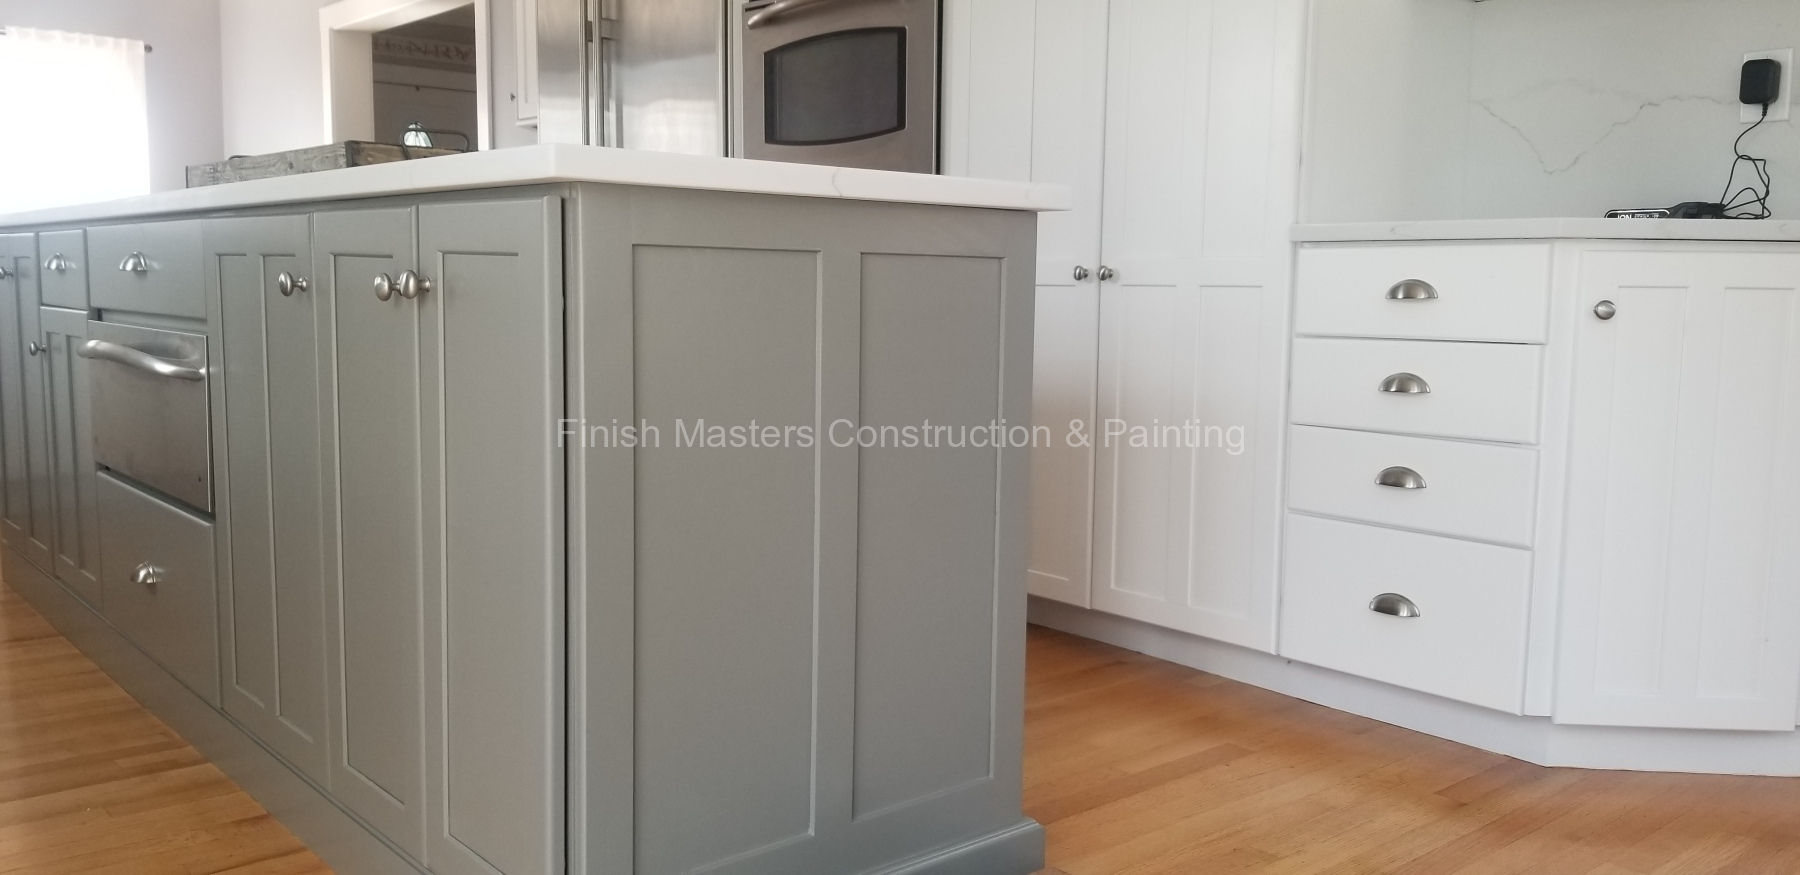 Kitchen Remodeling in Merrimack by Finish Masters